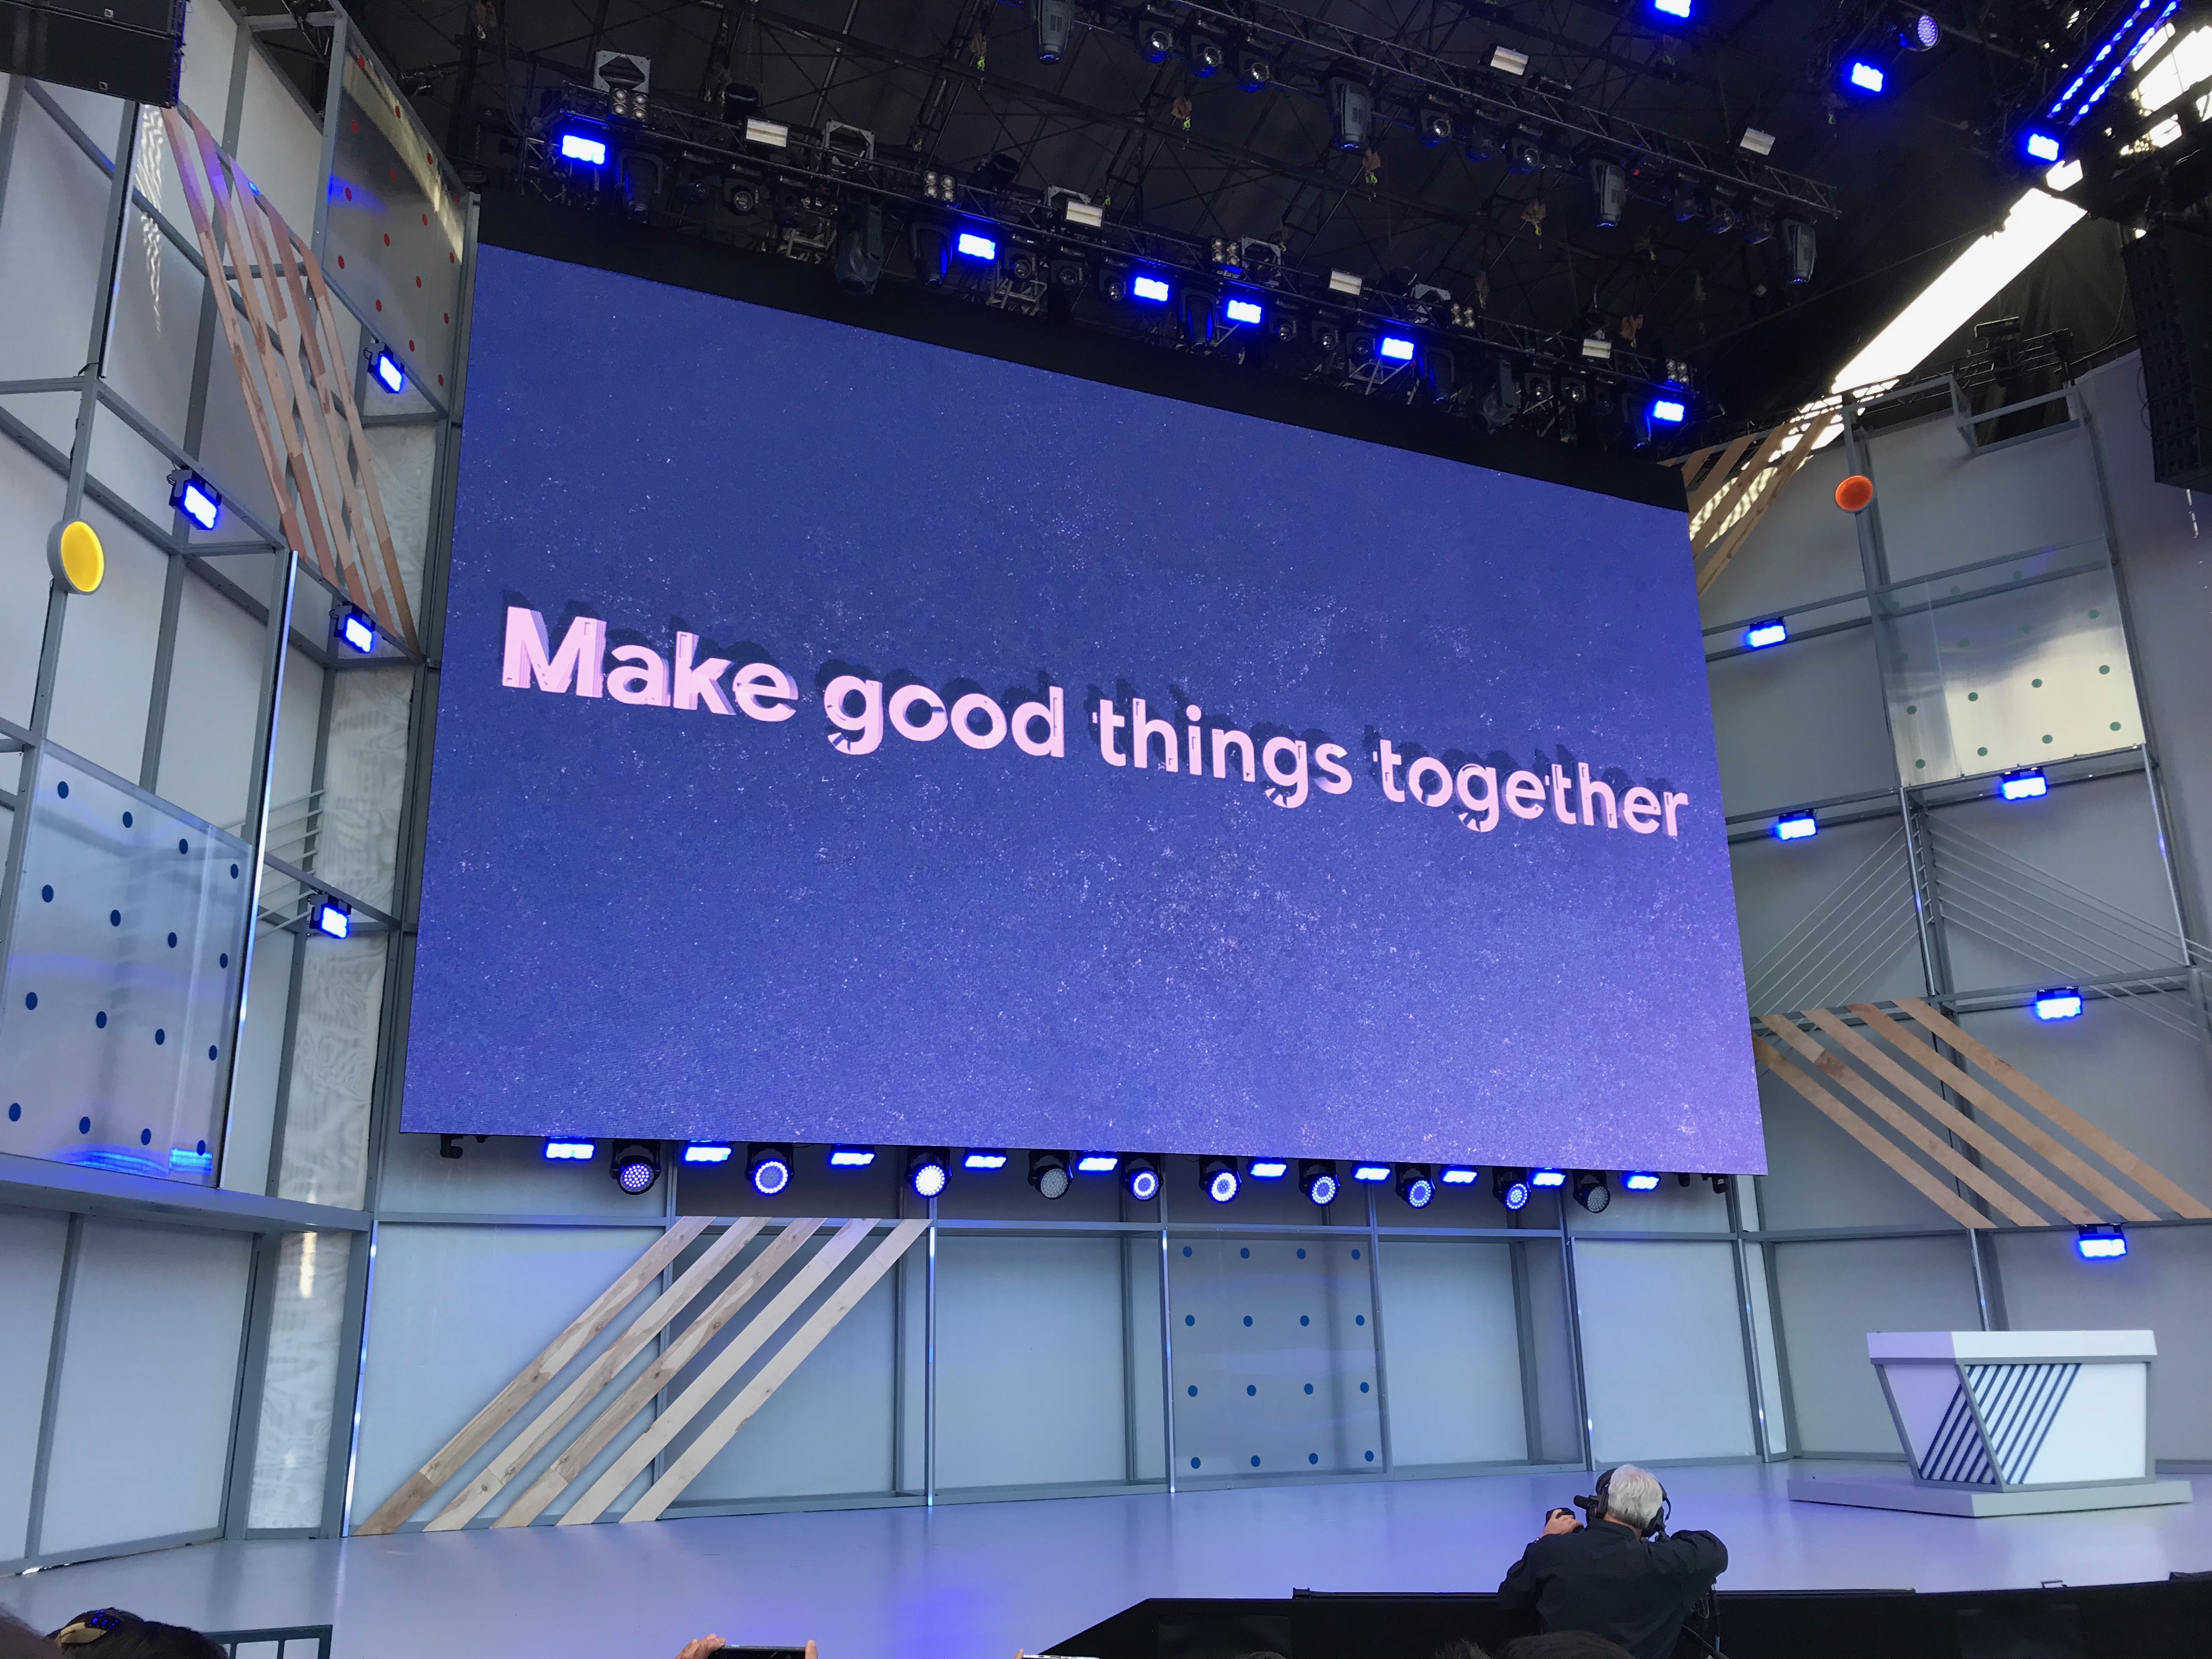 Make good things together